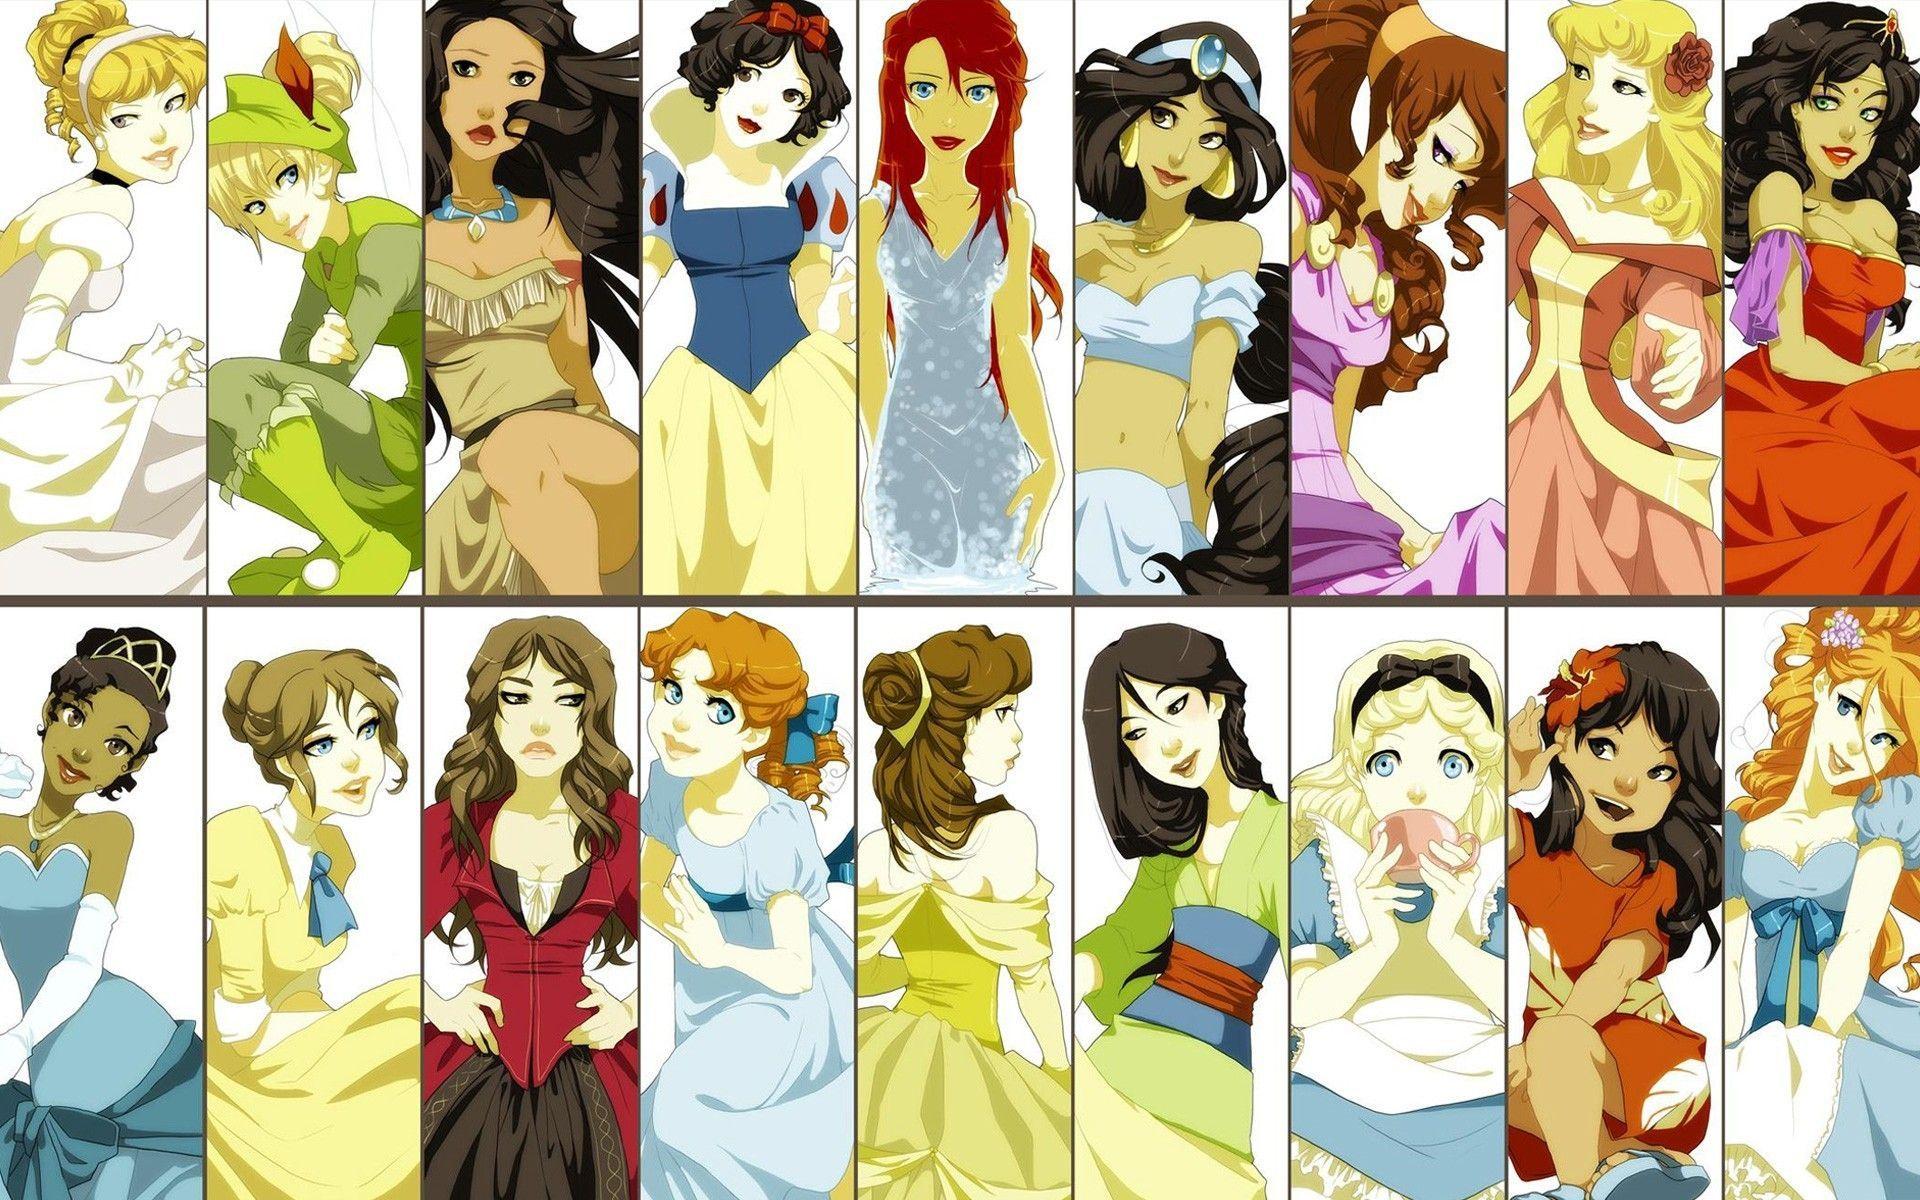 This Artist Transforms Disney Properties Into Anime Characters